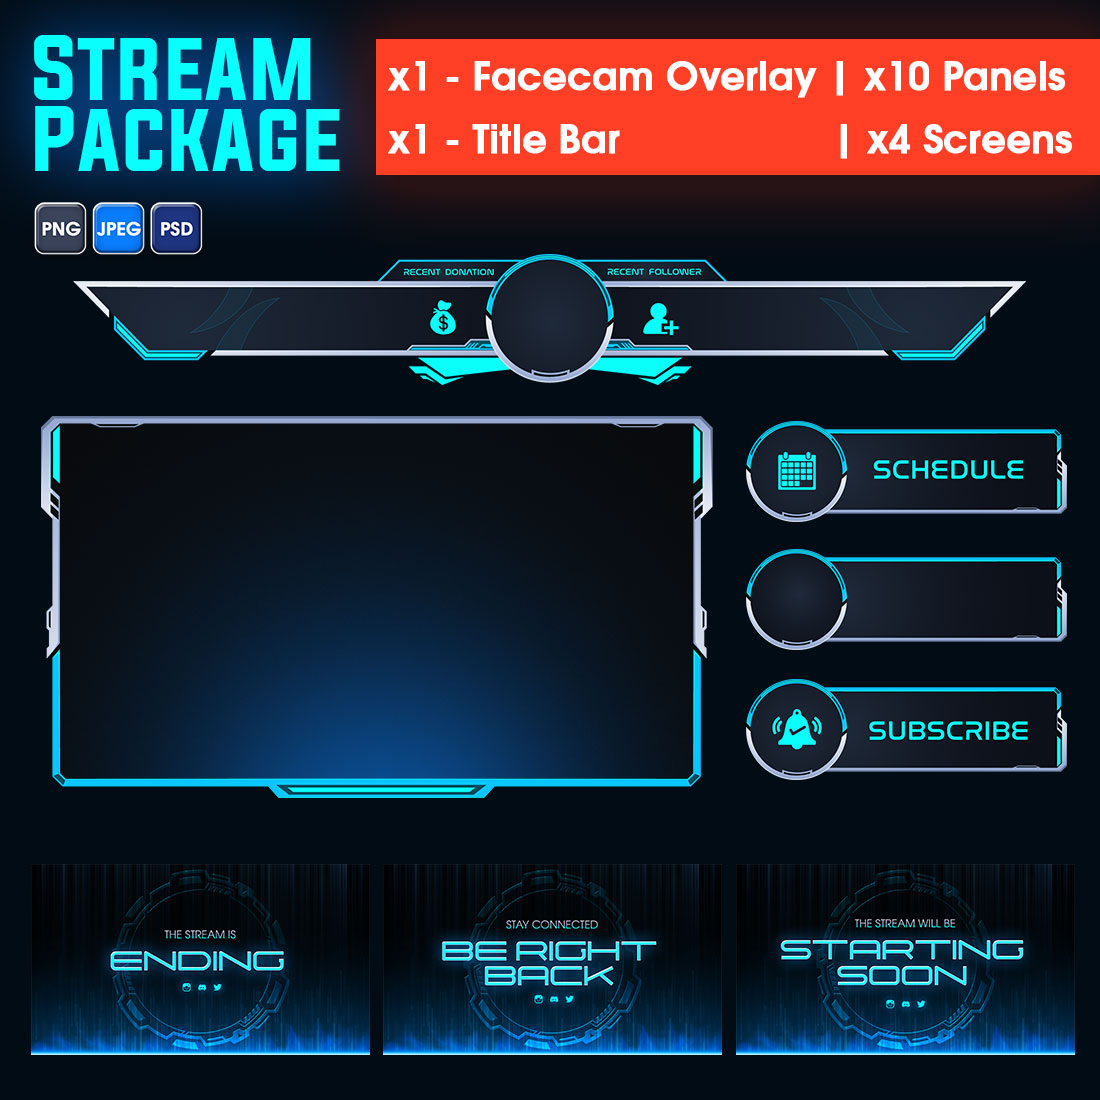 Futuristic Sci-fi Twitch Gaming Stream Overlay pack Blue - Facecam, x10 panels, x4 Intermission Screens cover image.